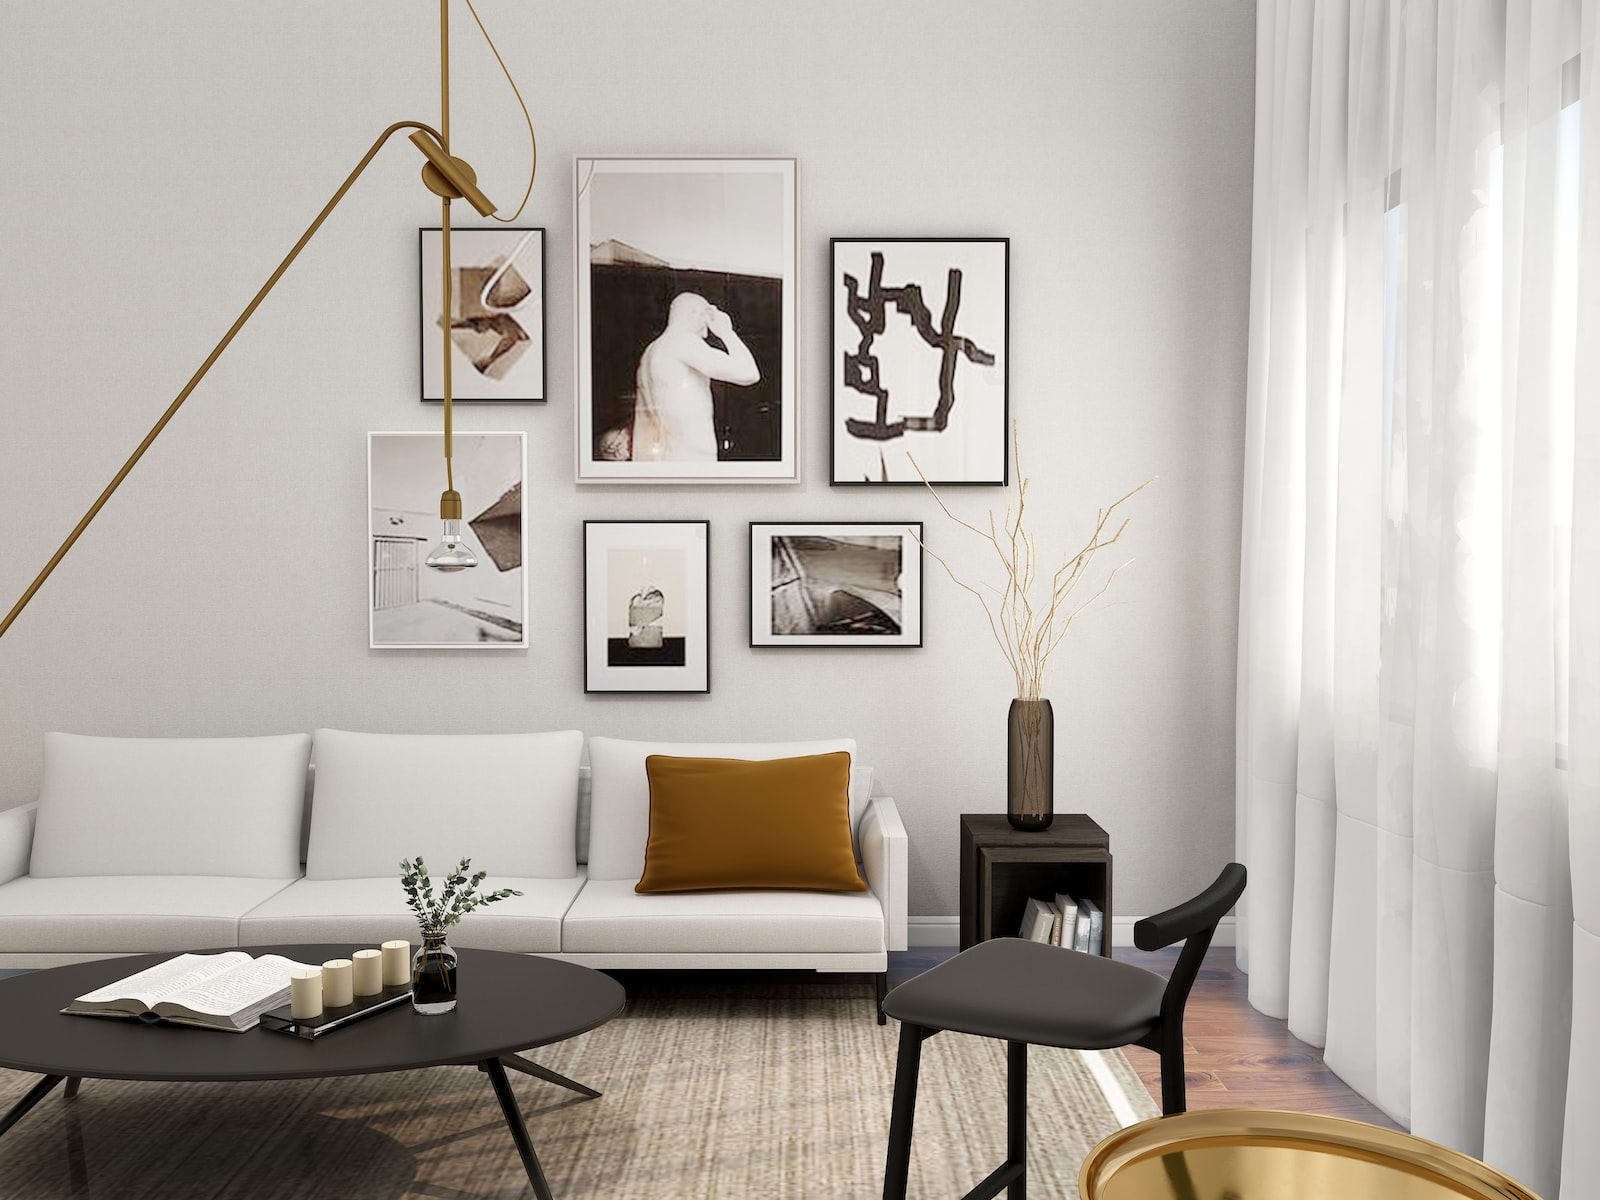 How to Create a Modern Interior Design on a Budget